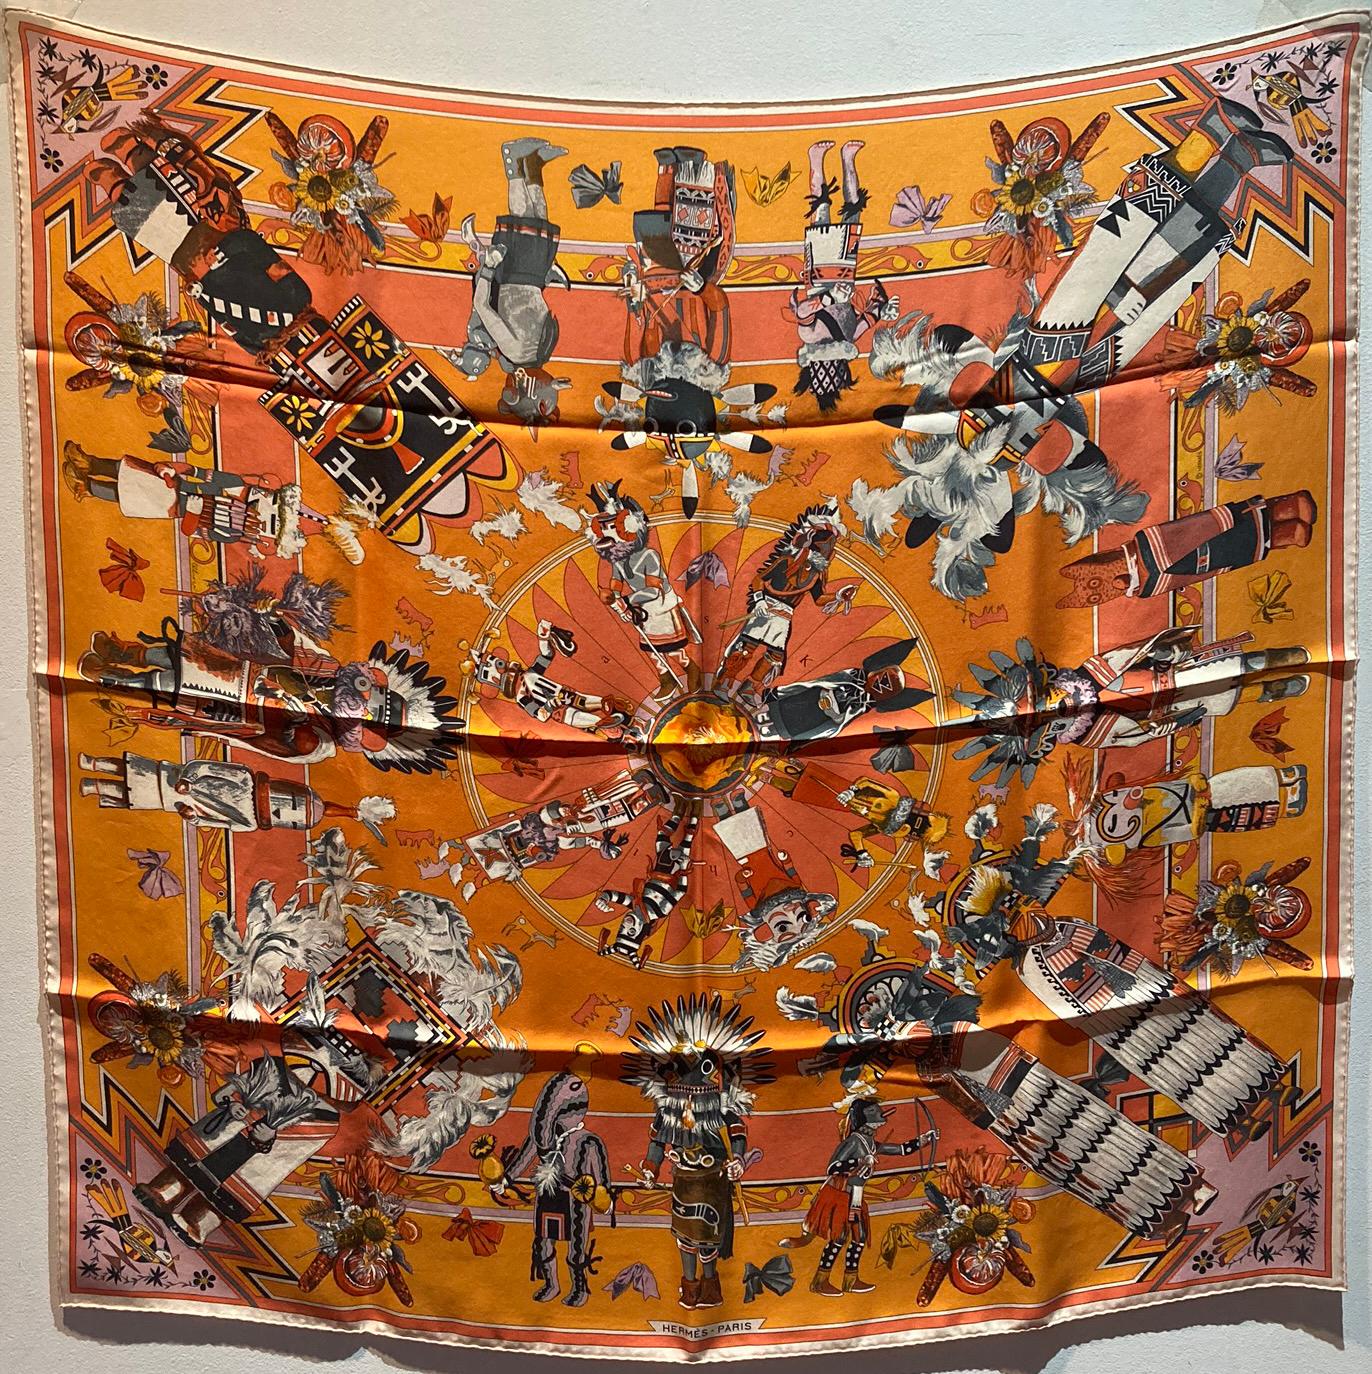 Hermes Kachinas Silk Scarf in excellent condition. Original silk screen design c1992 by Kermit Oliver features various multicolor native american chiefs and people in traditional dress over an orange background. This is a highly collectible piece as